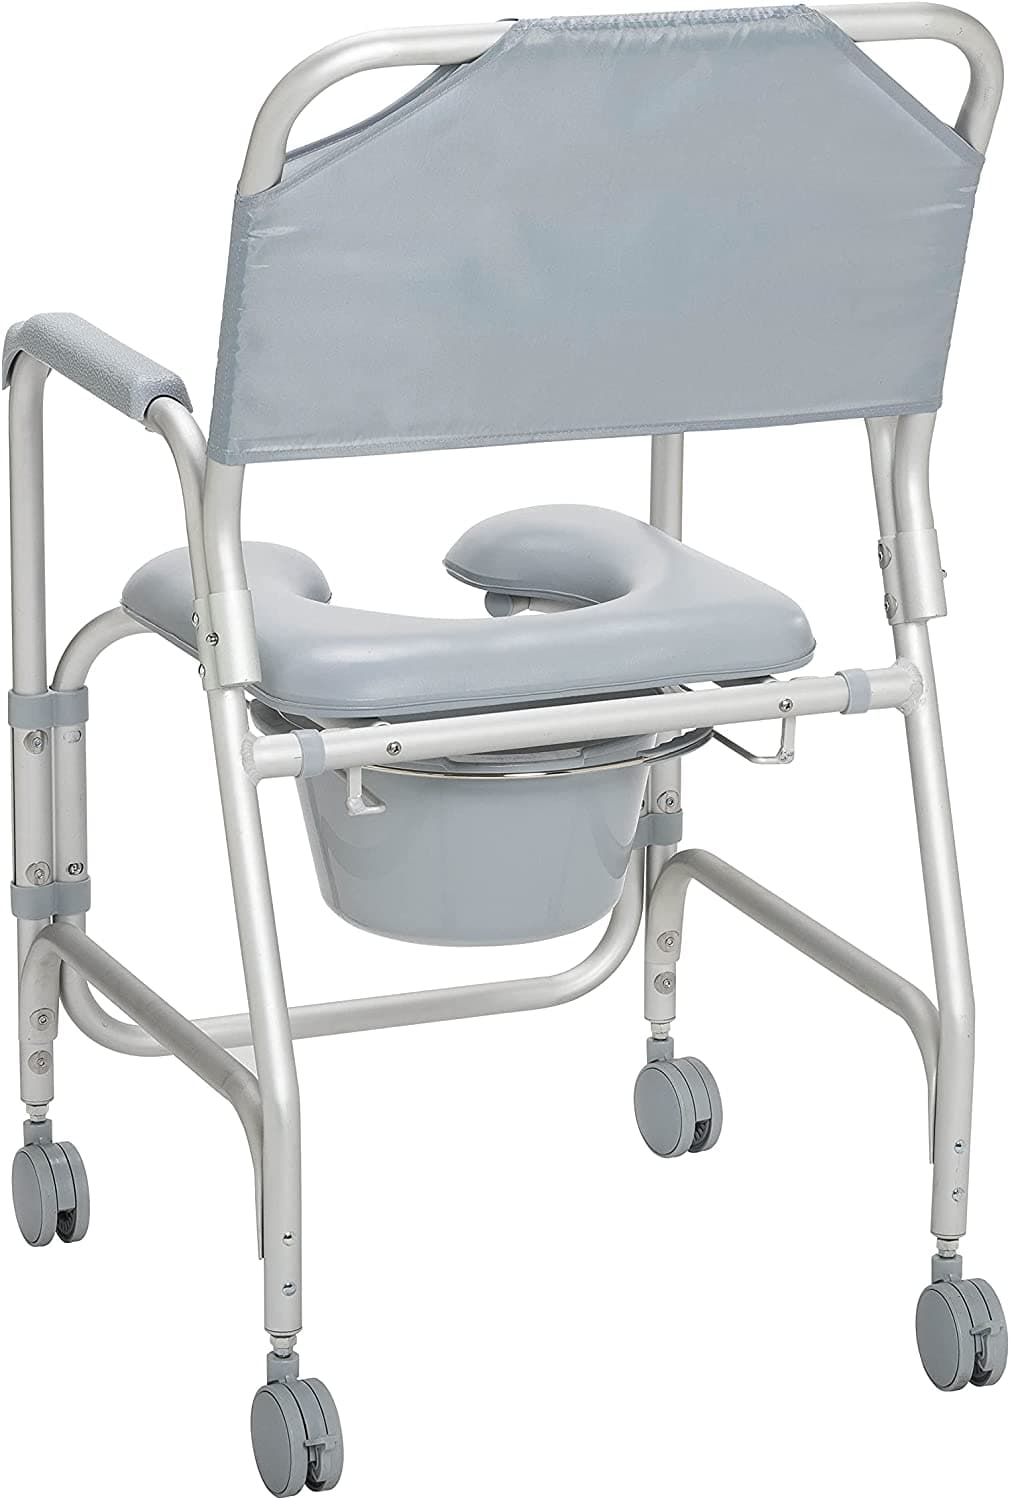 Drive Medical Aluminum Shower Chair and Commode with Casters - Senior.com Commodes